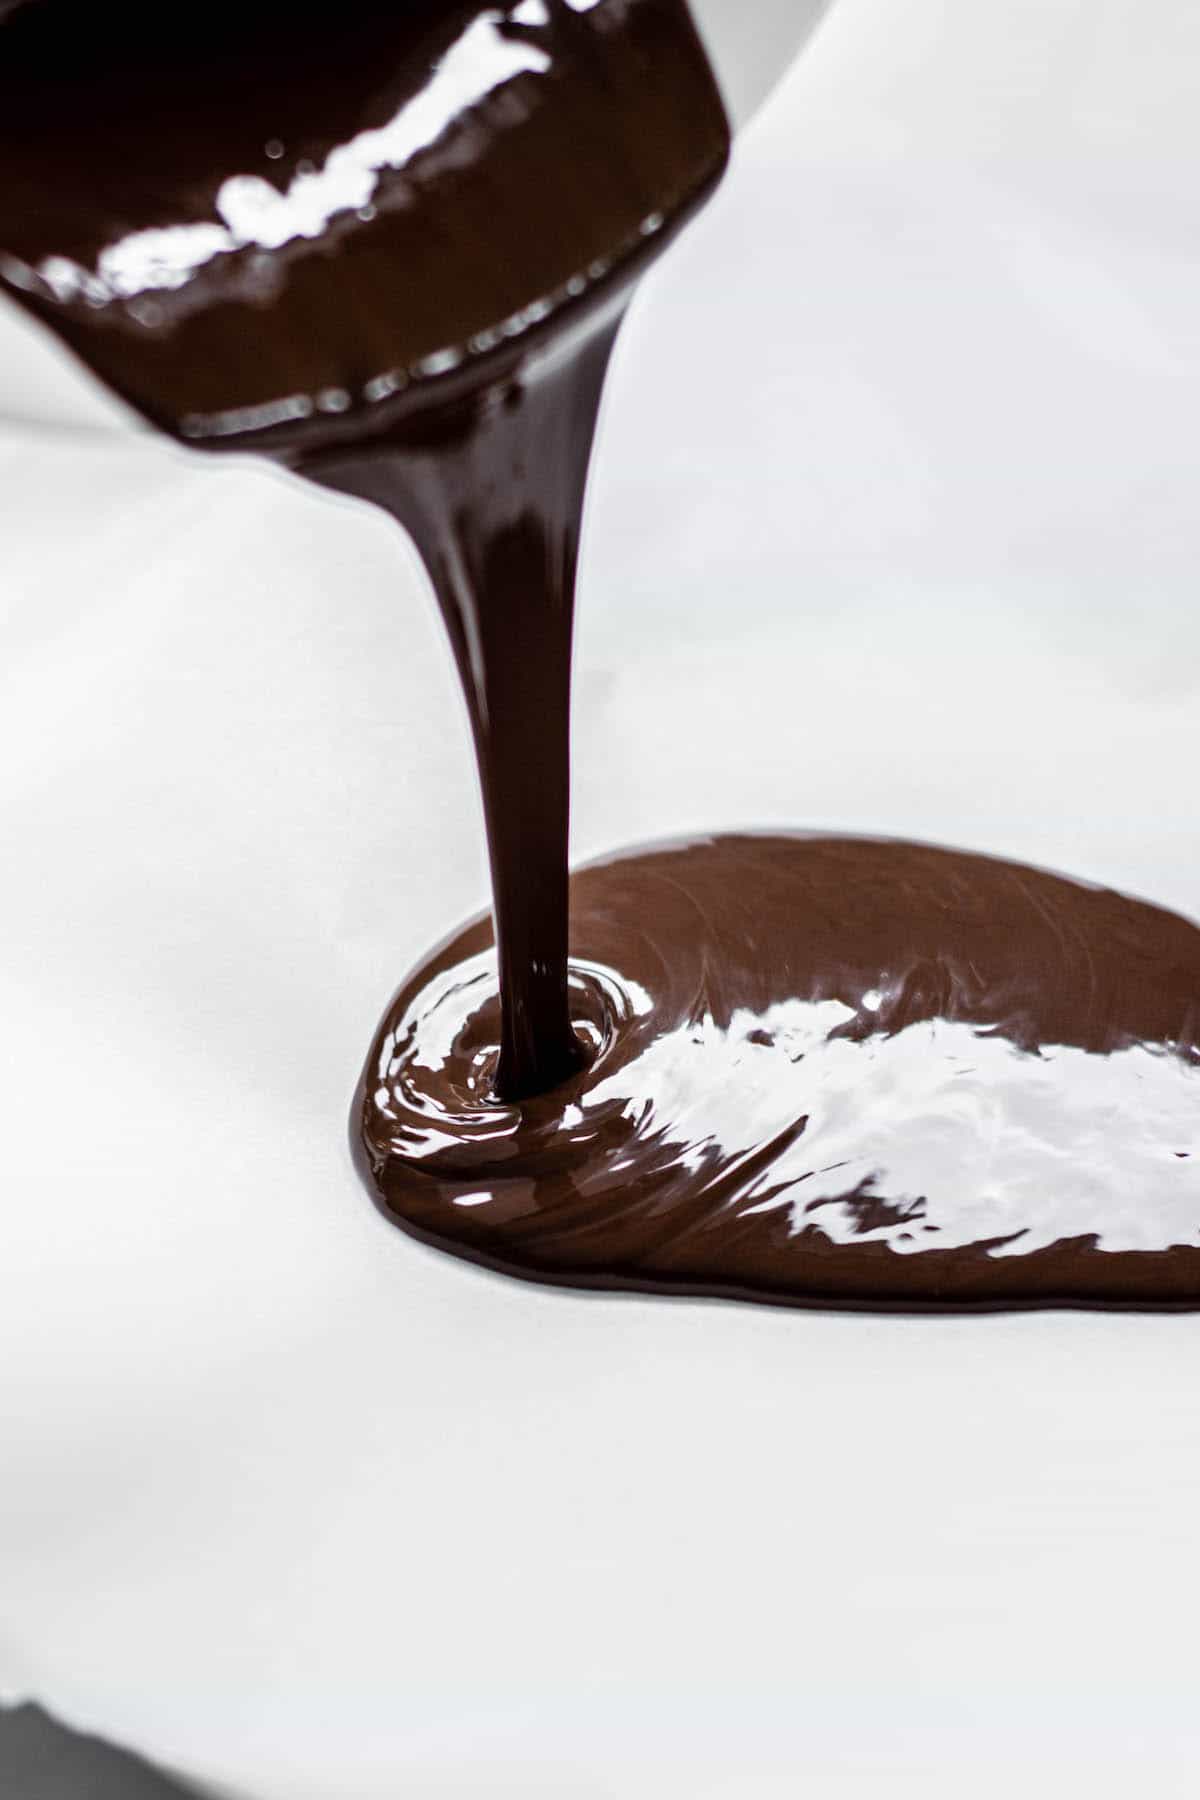 chocolate being poured on baking paper.